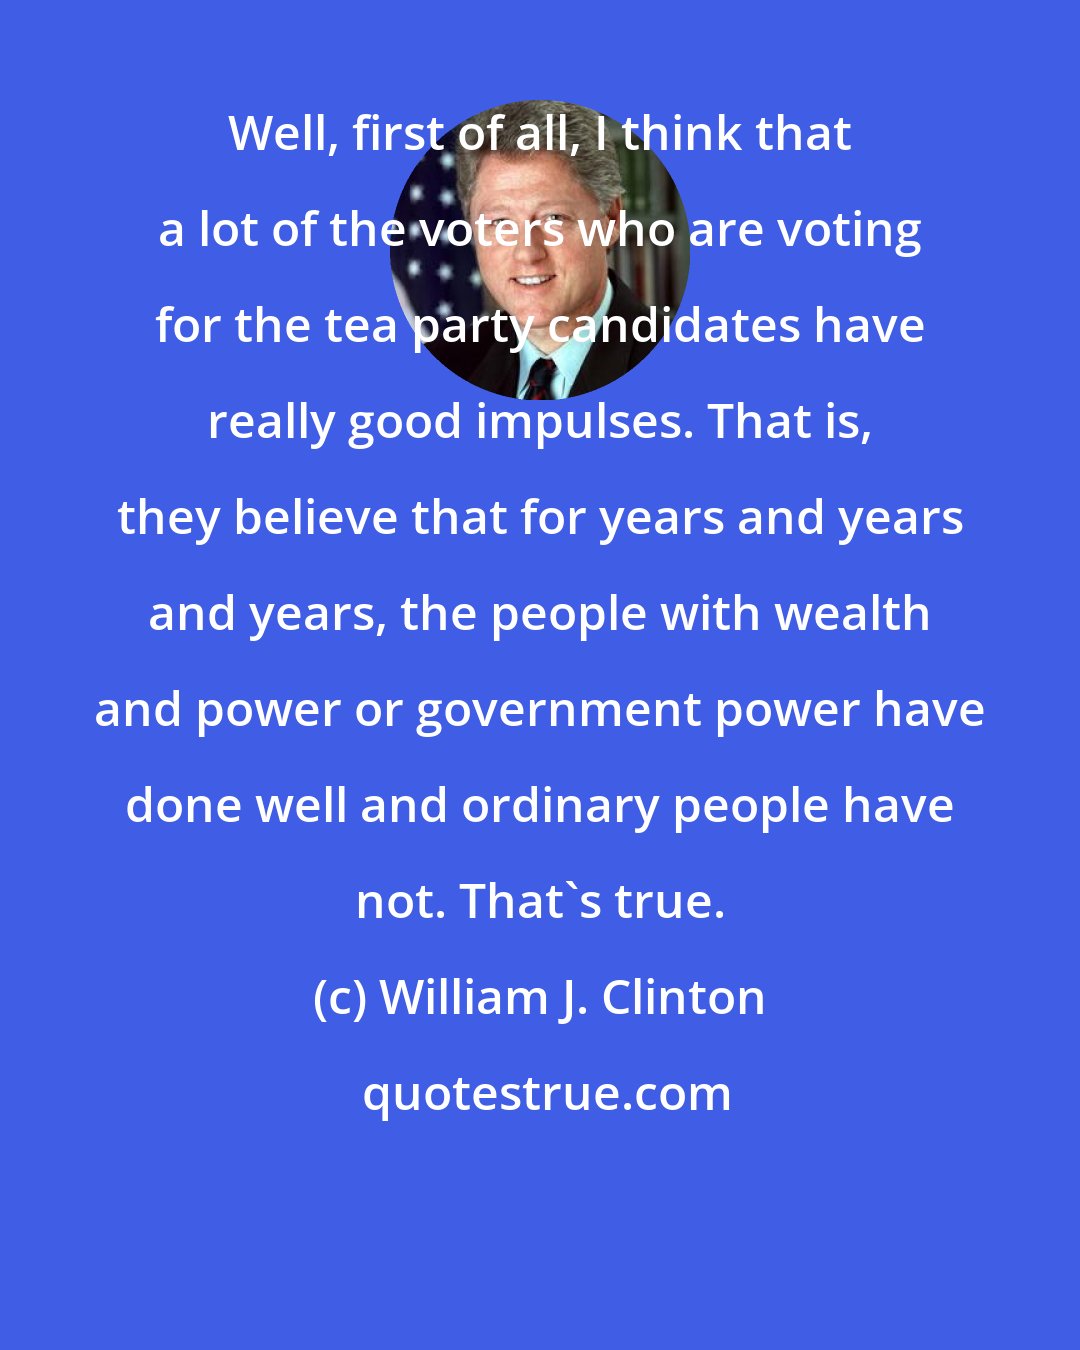 William J. Clinton: Well, first of all, I think that a lot of the voters who are voting for the tea party candidates have really good impulses. That is, they believe that for years and years and years, the people with wealth and power or government power have done well and ordinary people have not. That's true.